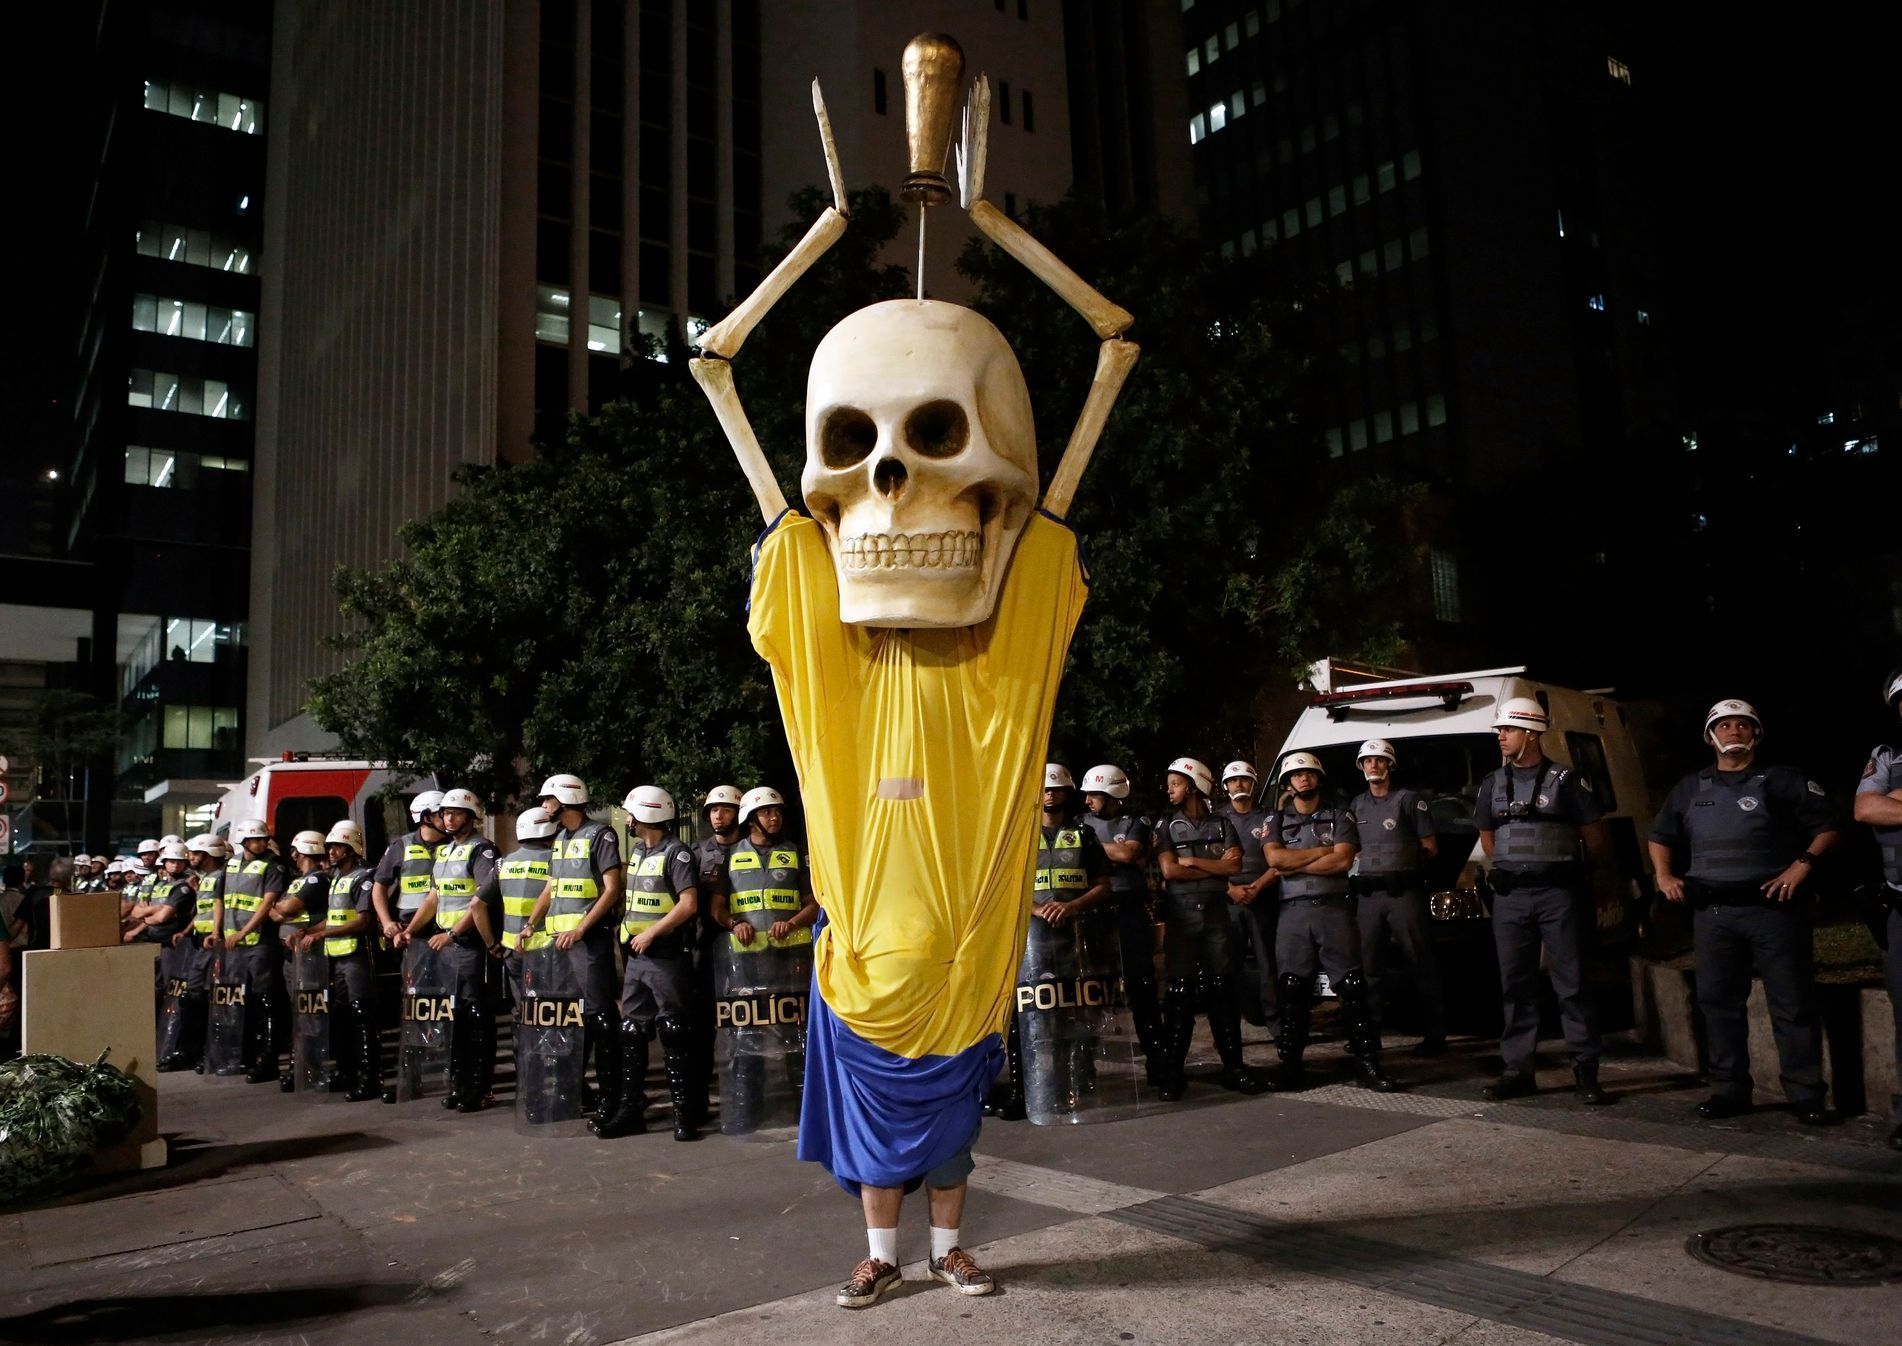 Military policemen stand in a line behind a demonstrator wearing the figure of a skeleton holding up a trophy representing that of the FIFA World Cup during a protest against the 2014 World Cup, in Sa